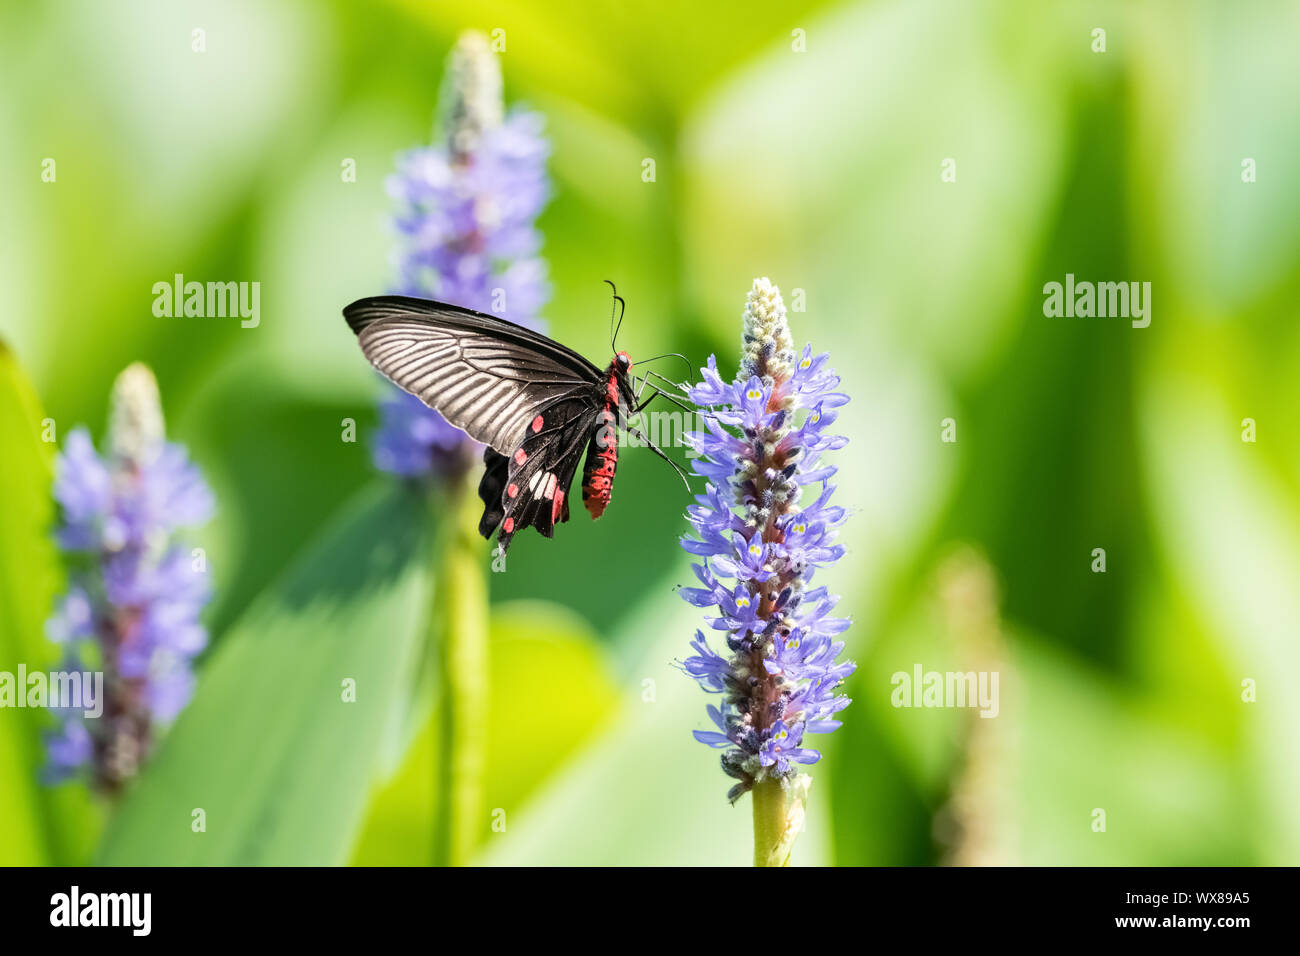 Swallowtail butterfly on flower Banque D'Images